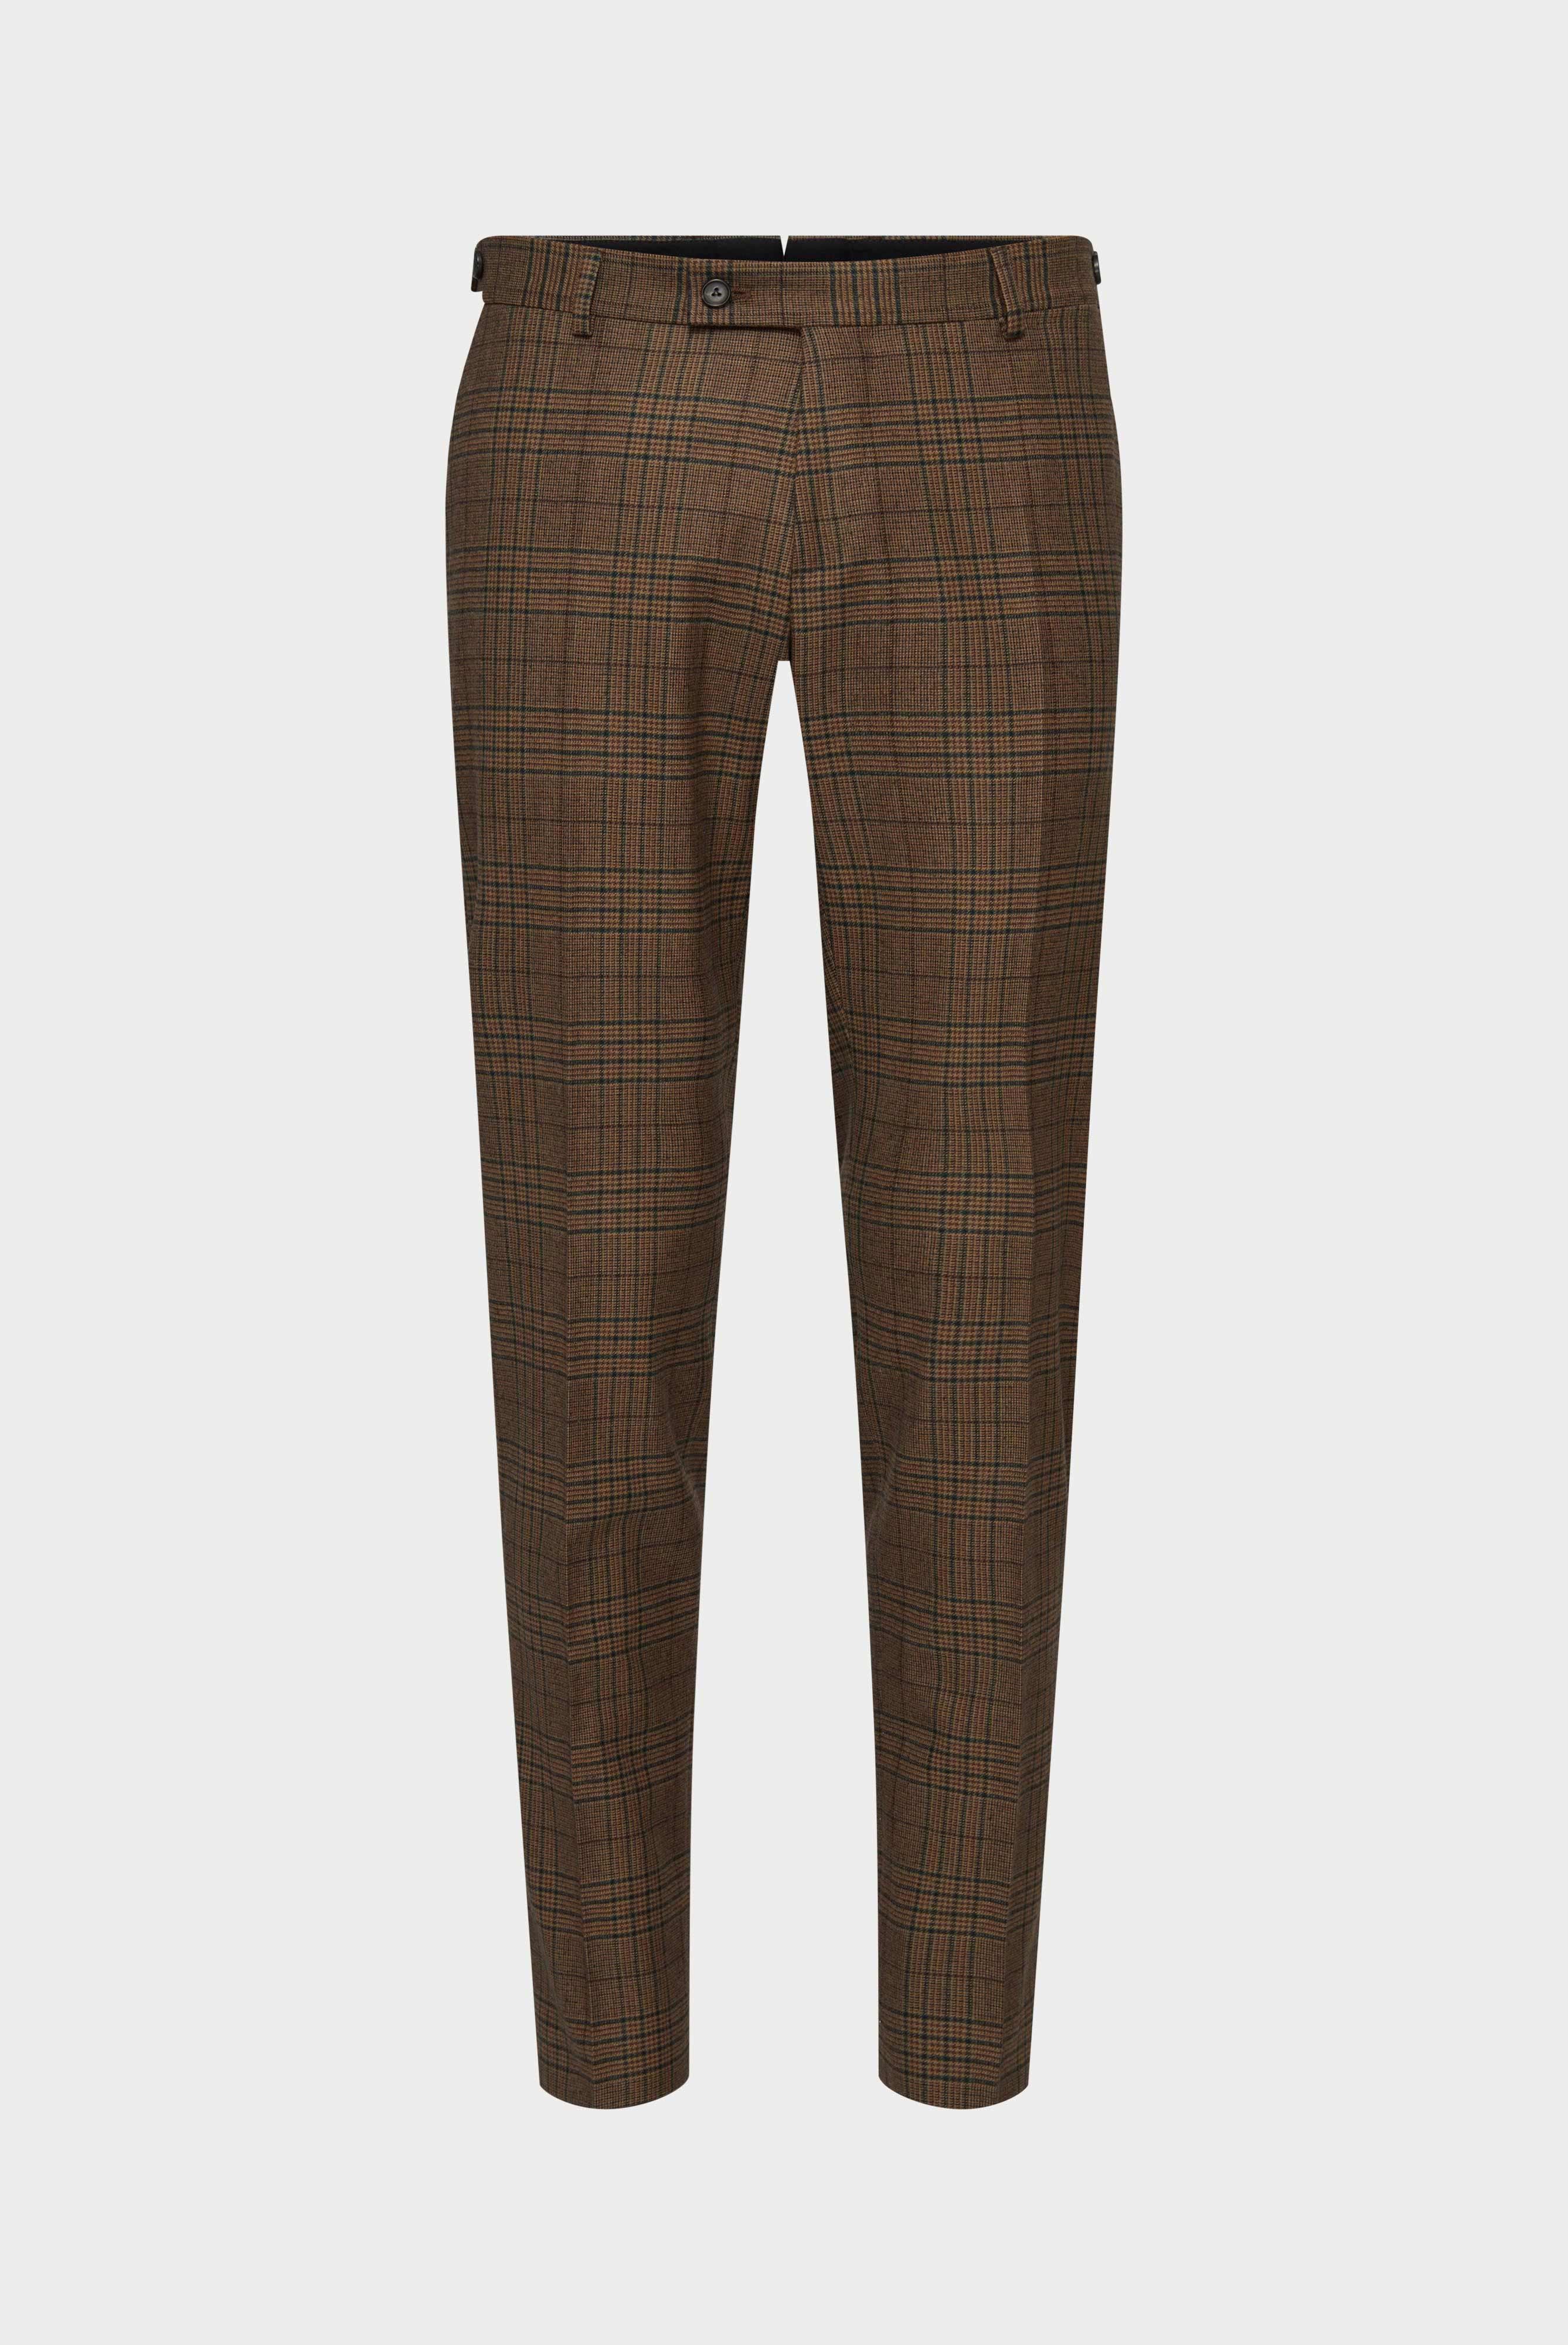 Checkt trousers slim fit